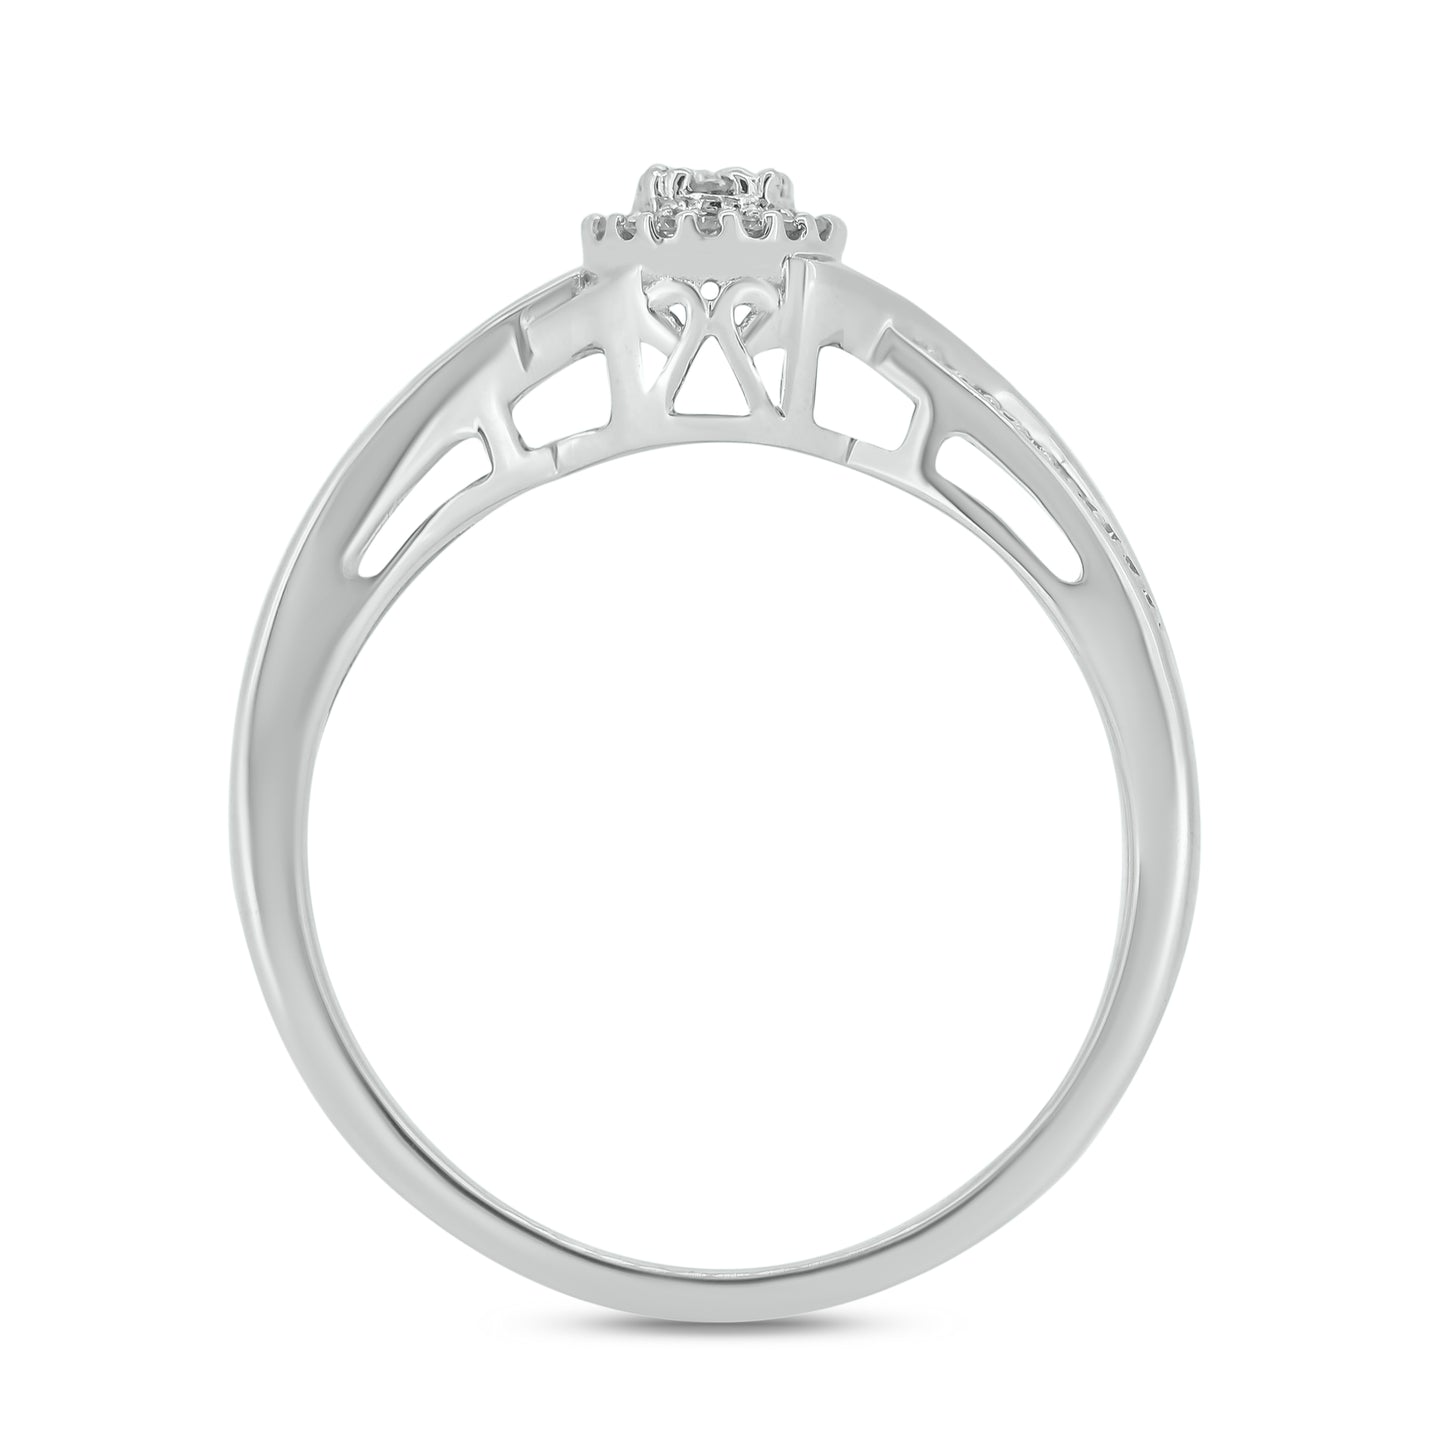 Swirled Promise Ring in 925 Sterling Silver